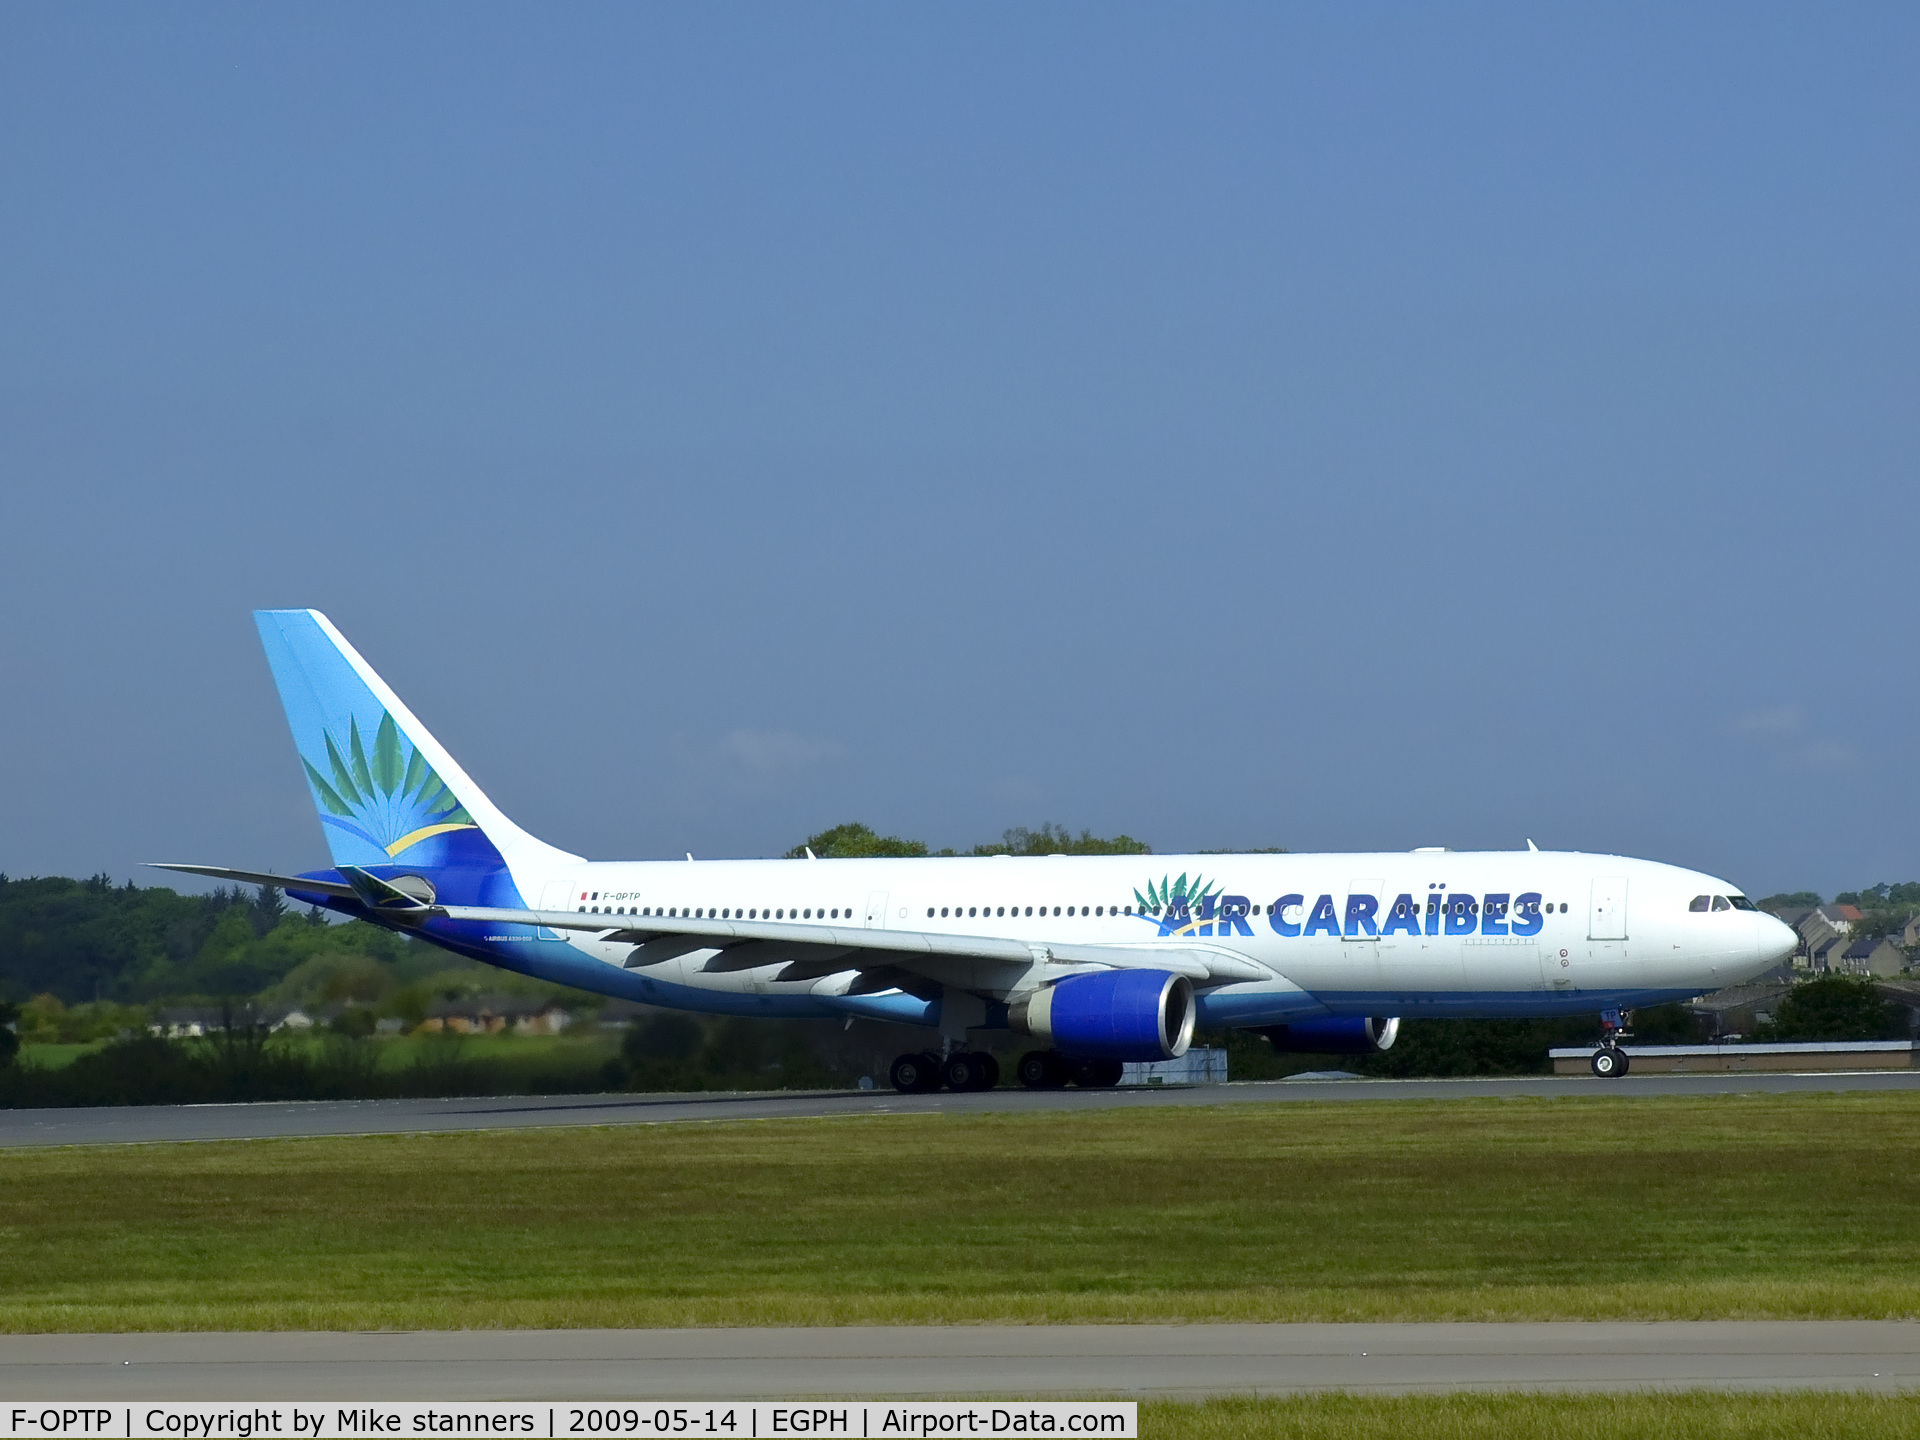 F-OPTP, 1999 Airbus A330-223 C/N 240, Air caraibes A330 Lined up for take off on runway 06